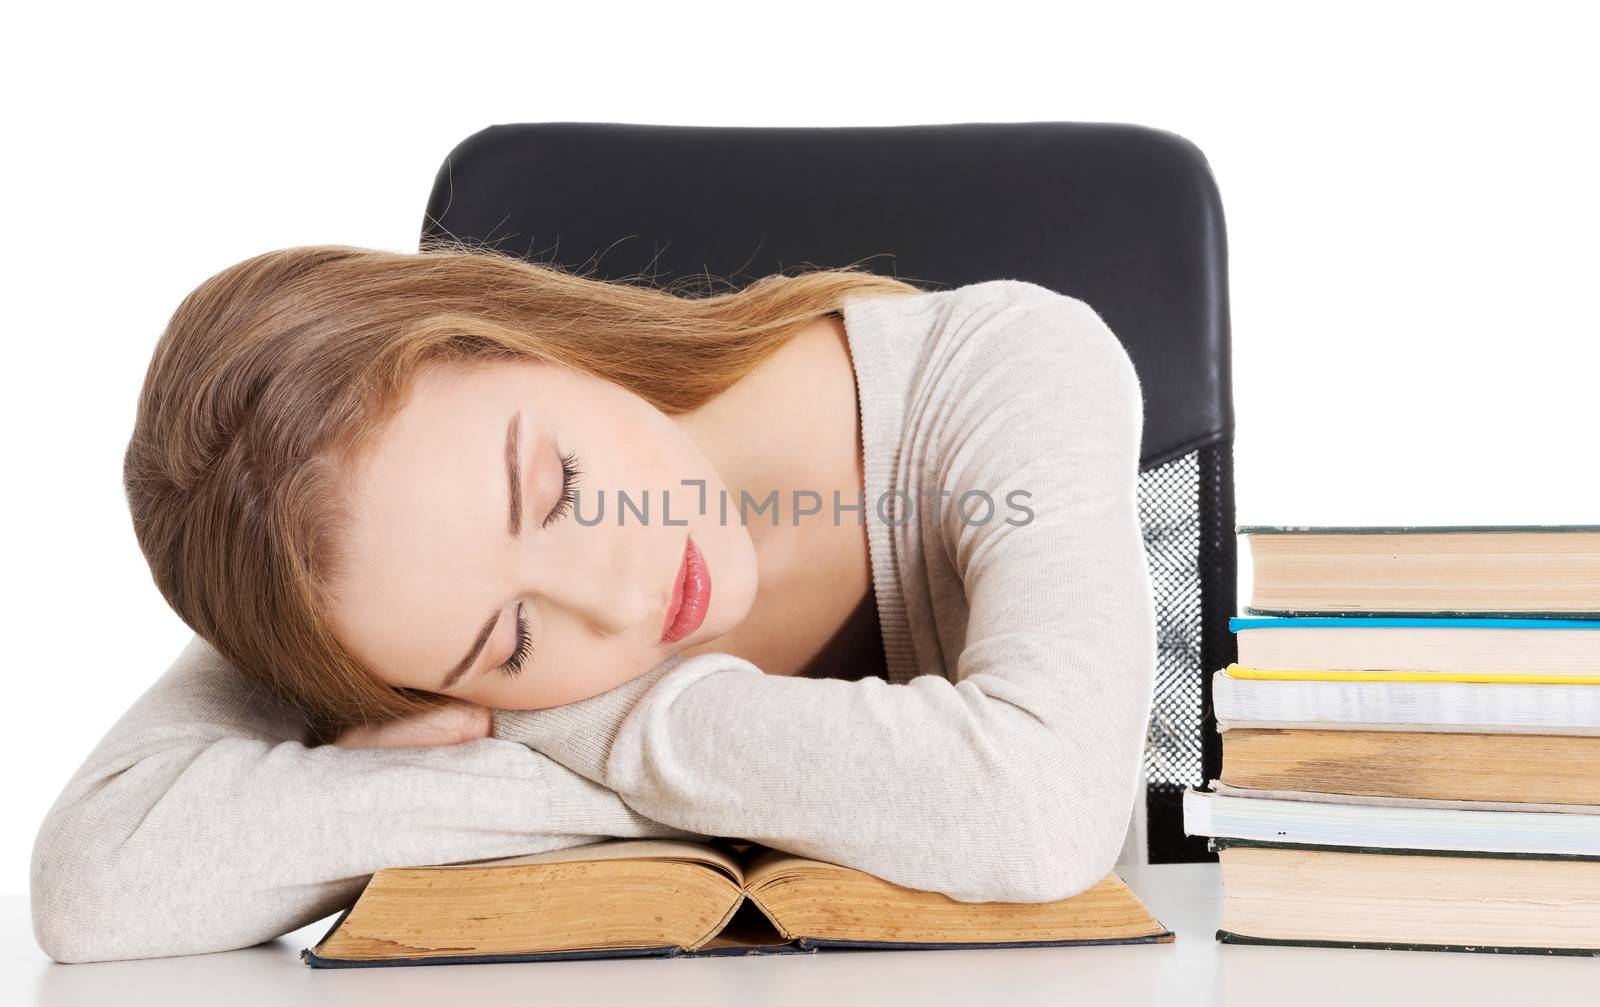 Beautiful woman is sleeping on a book. Student and education concept. Isolated on white.